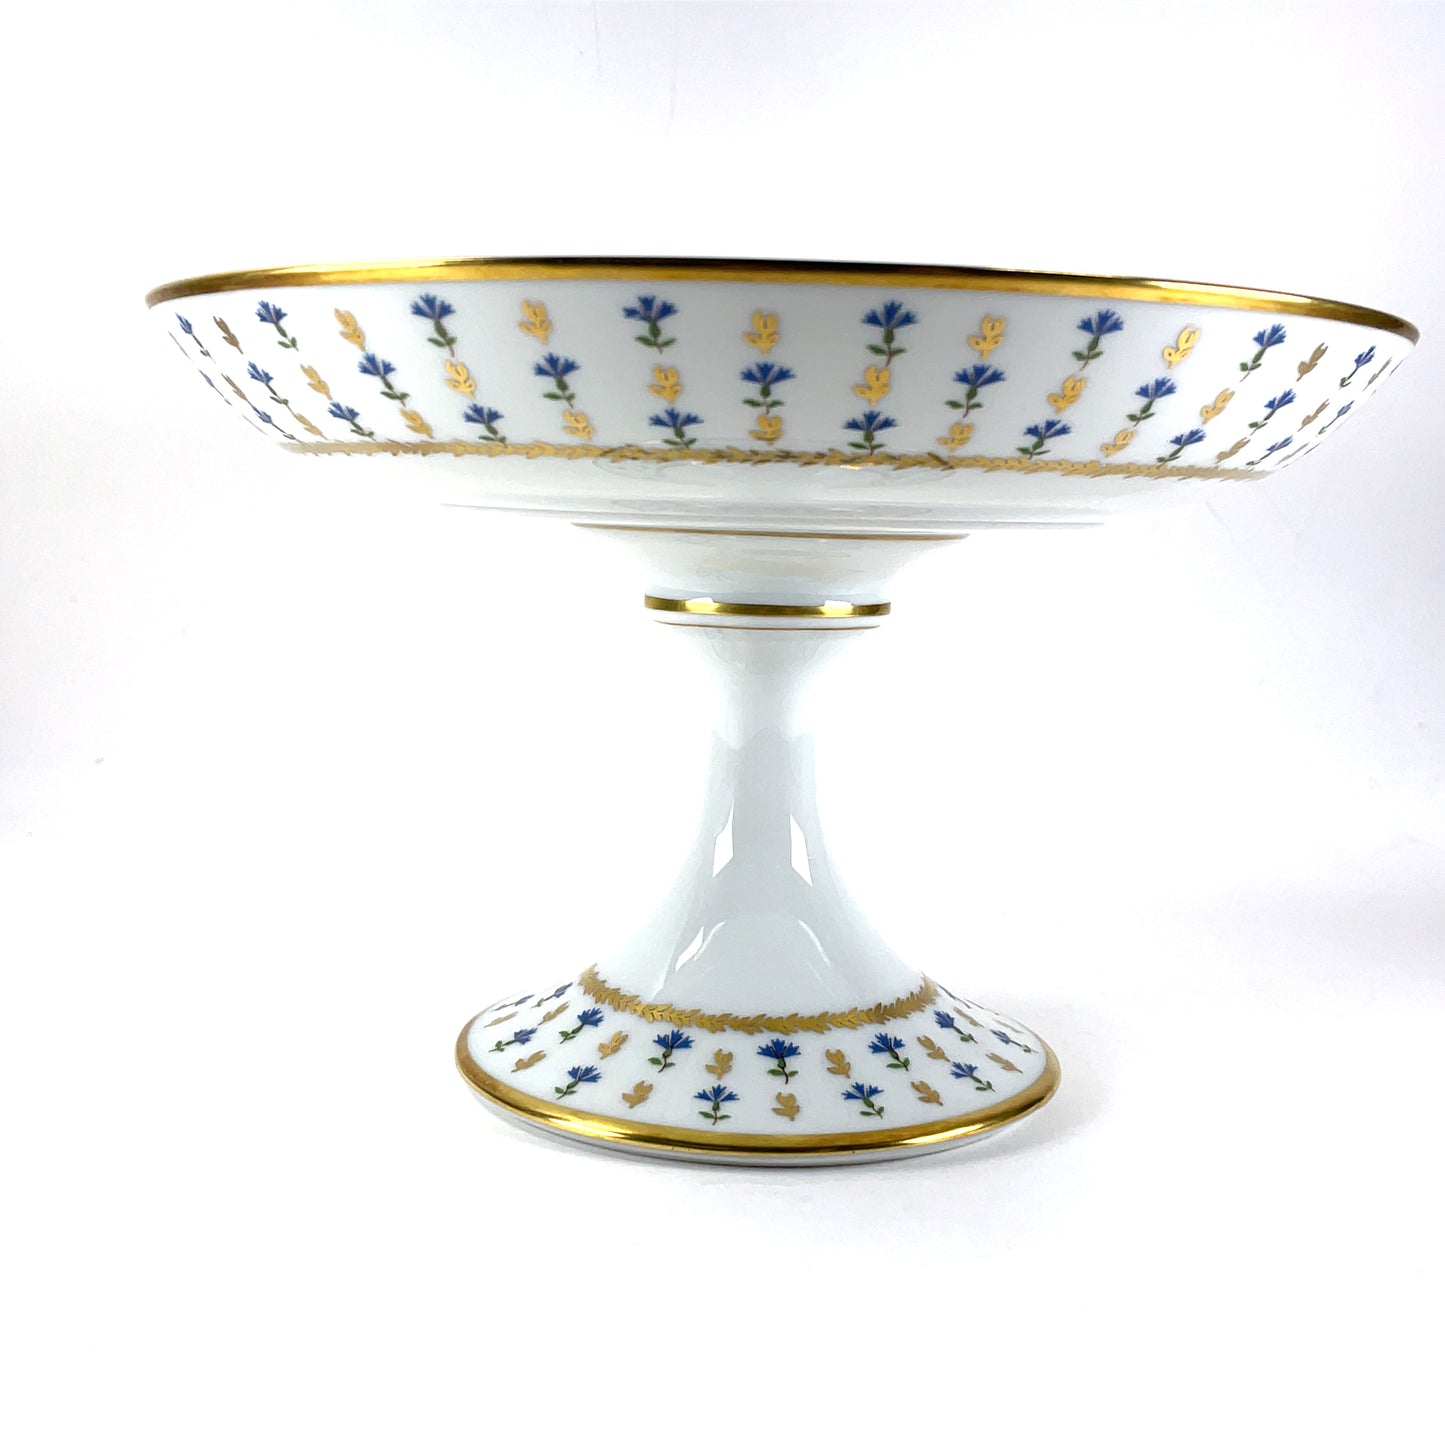 Limoges France Raynaud Vieux Nyon Nyon by Ceralene Cake Stand / Fruit Bowl Discontinued